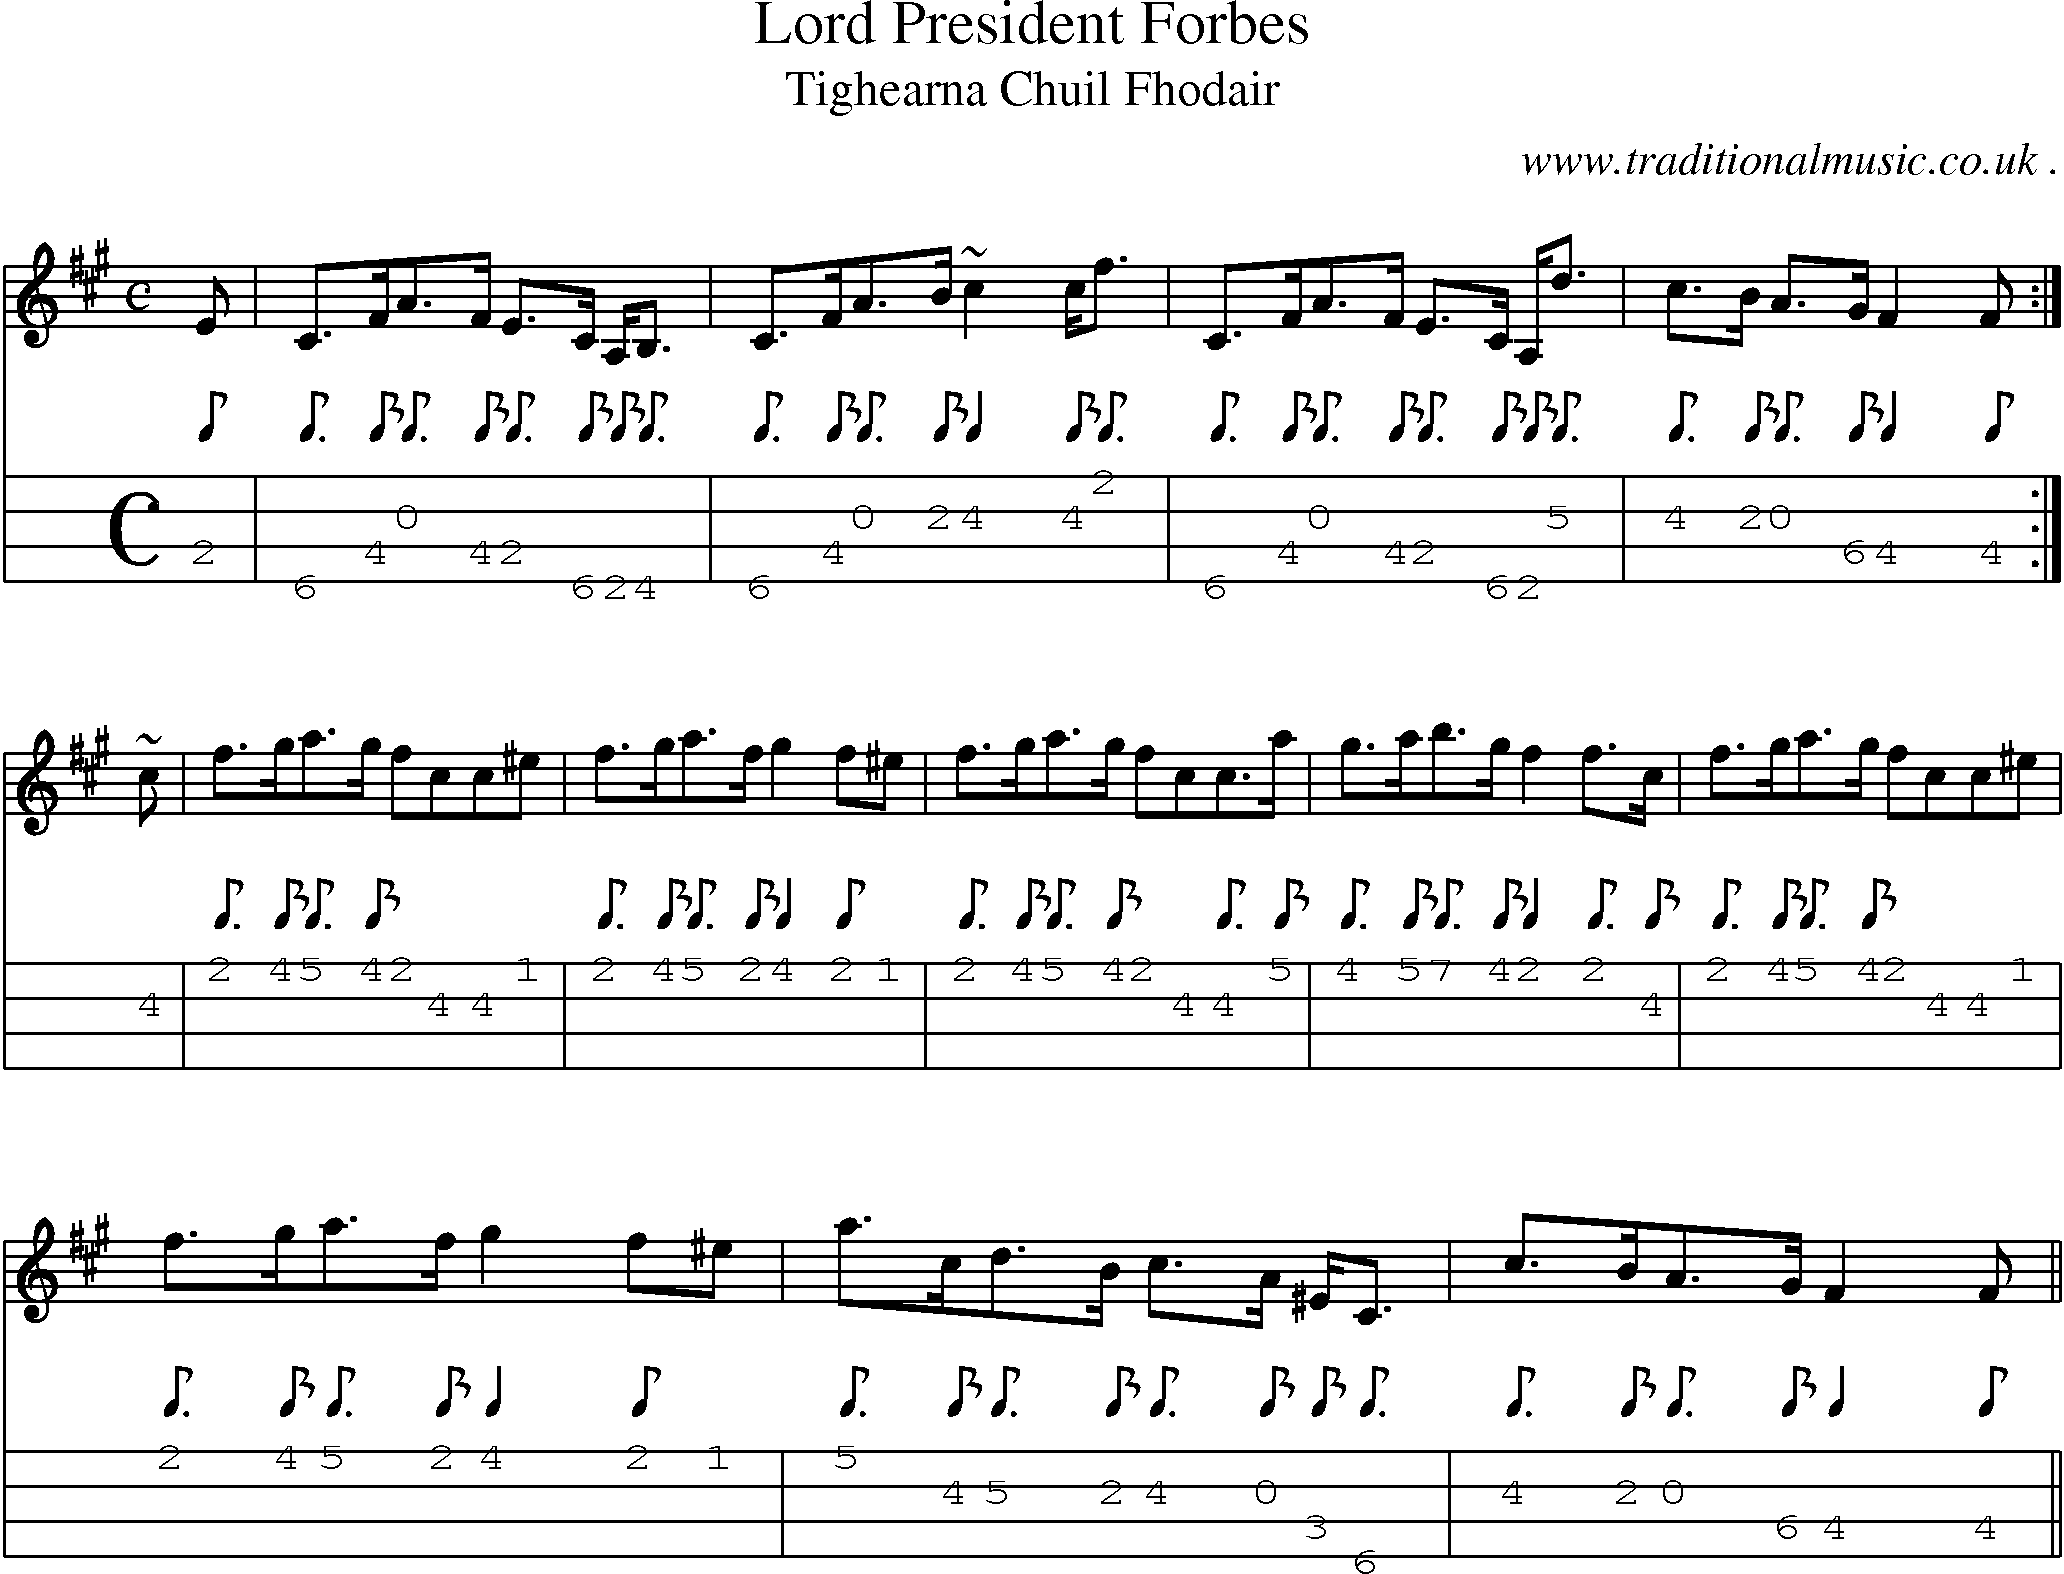 Sheet-music  score, Chords and Mandolin Tabs for Lord President Forbes